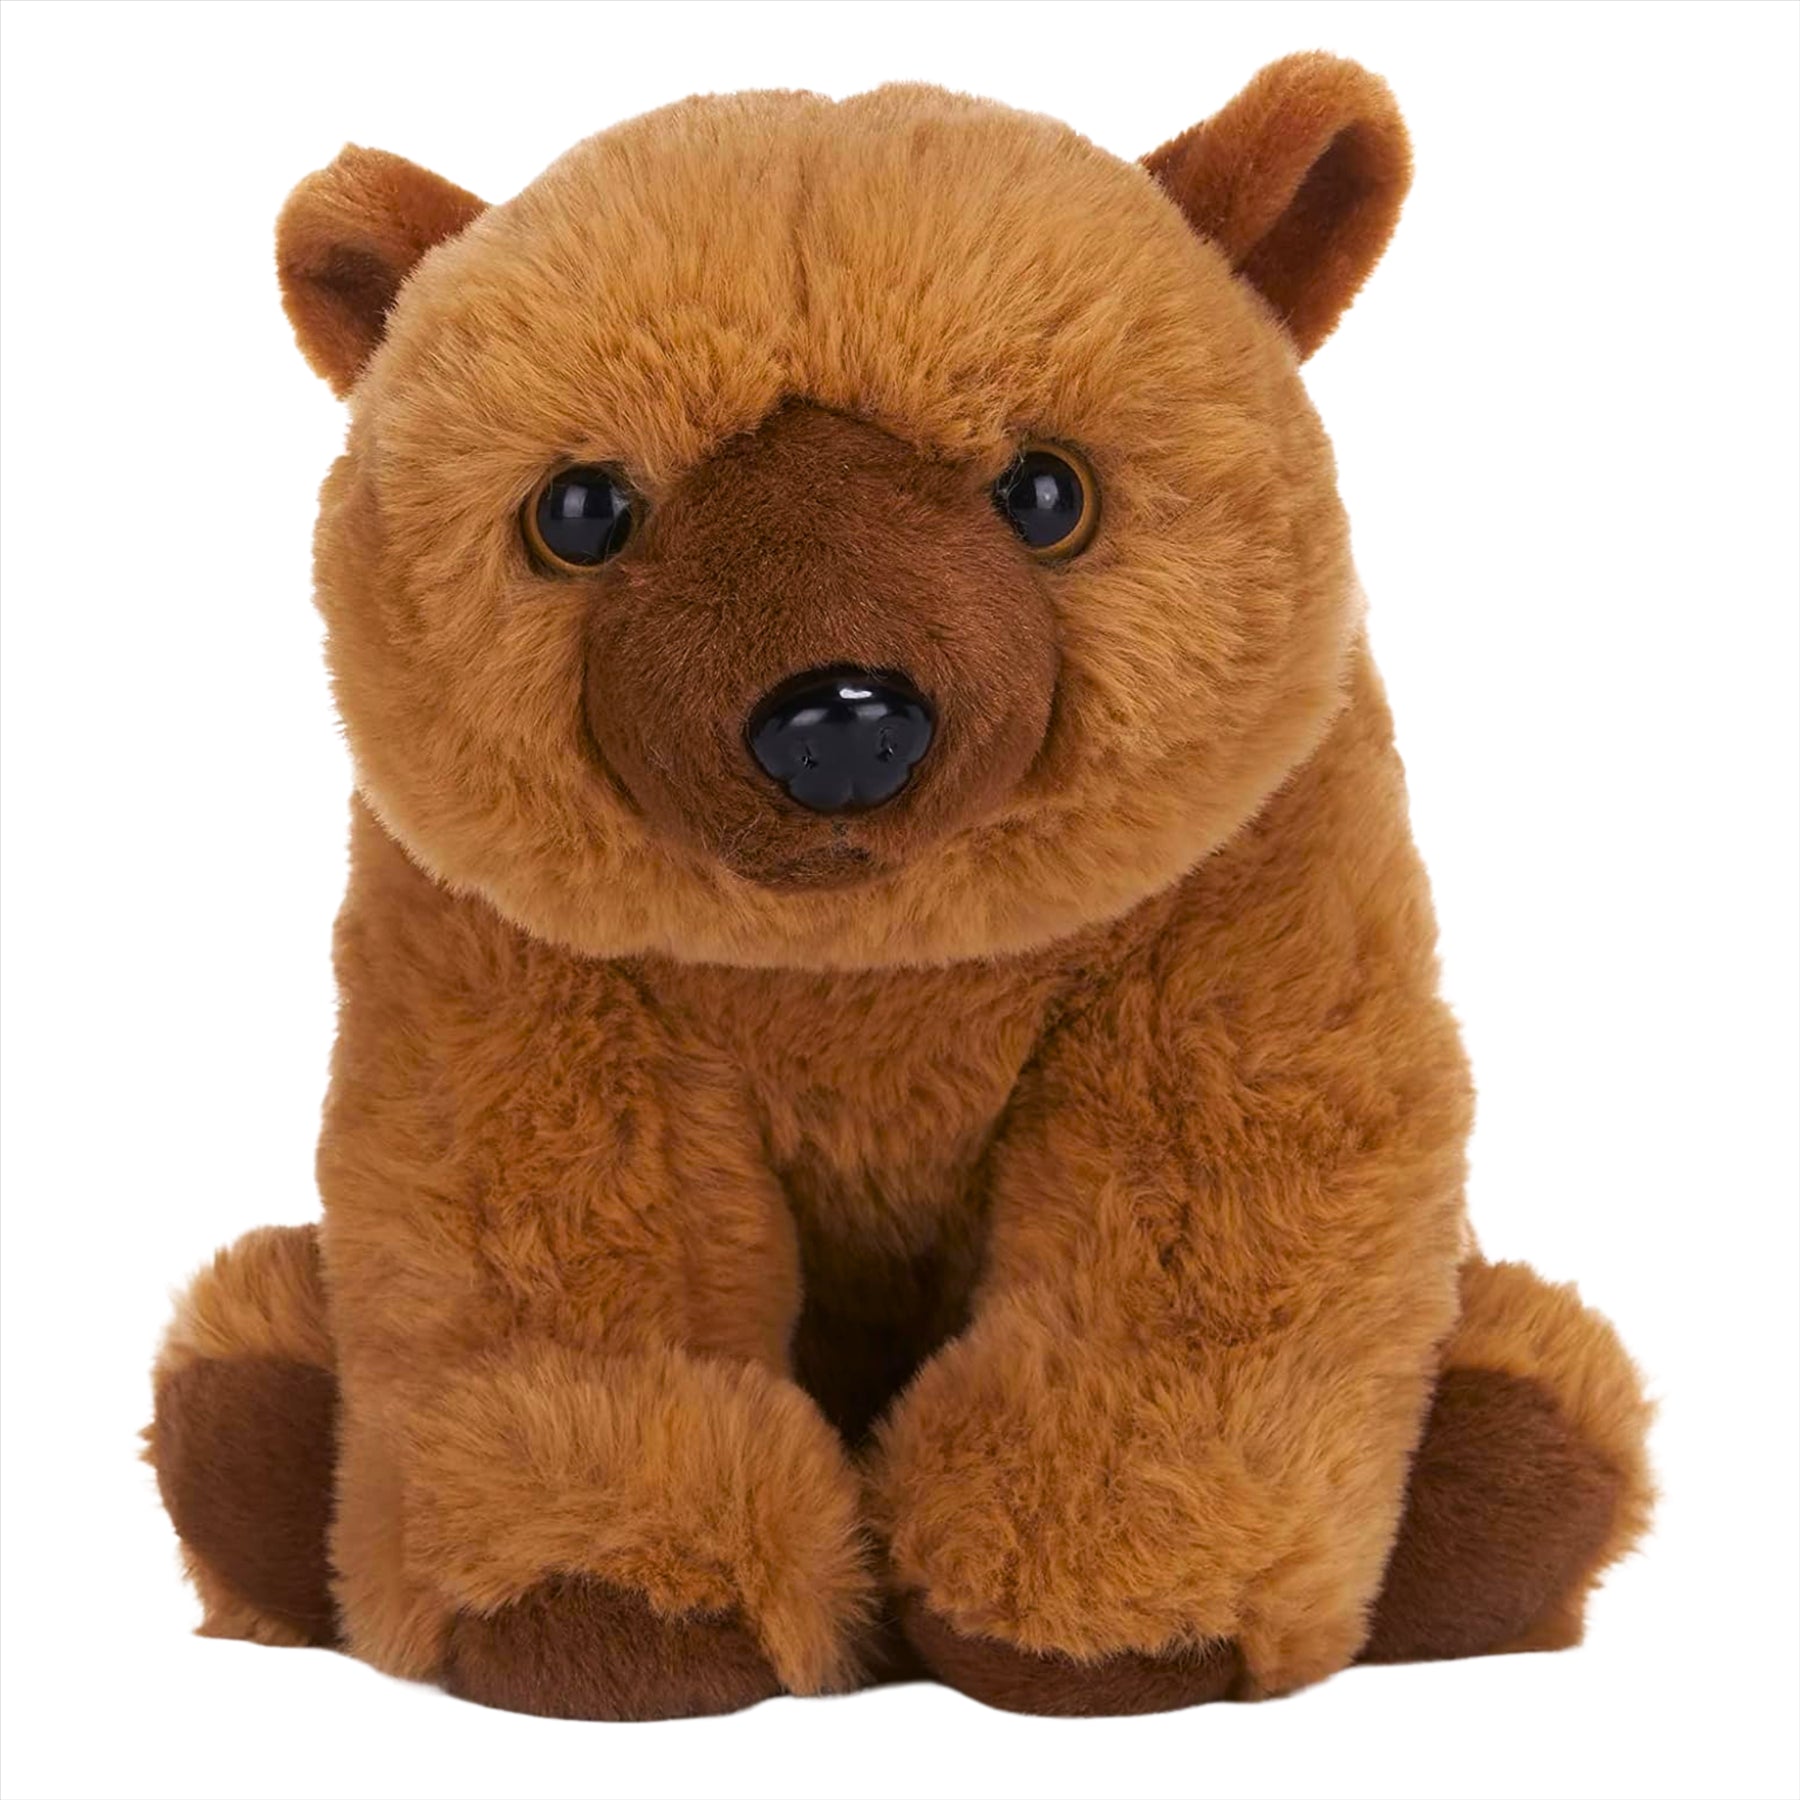 Posh Paws Around the World Animals Collection Grizzly Bear Super Soft Plush Toy 20cm 8"